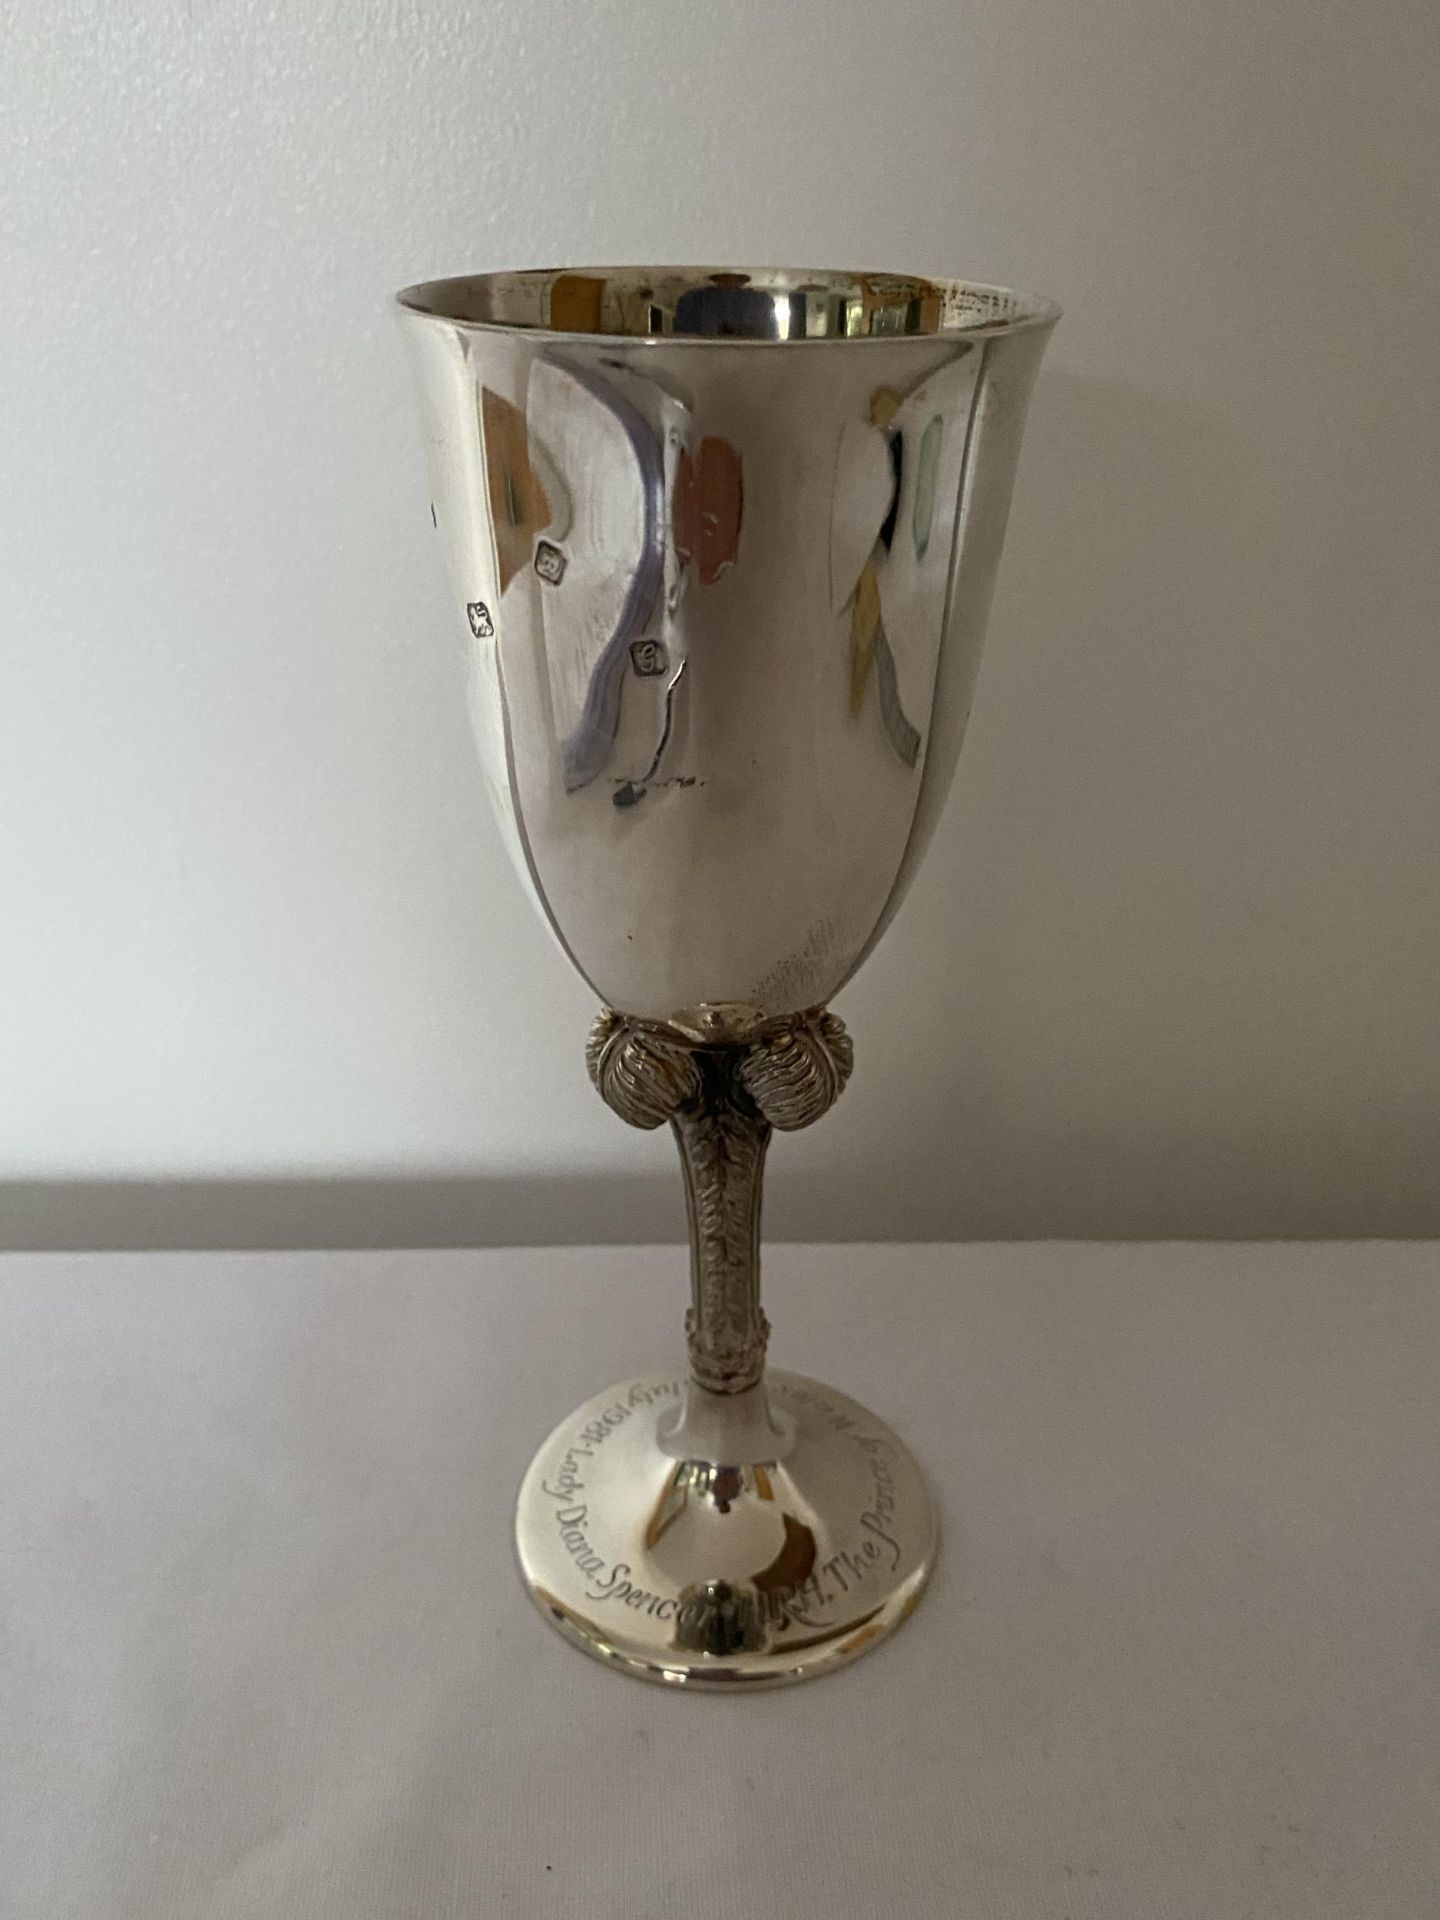 AN ELIZABETH II 1981 HALLMARKED LONDON SILVER COMMEMORATIVE LADY DIANA AND PRINCE CHARLES GOBLET - Image 5 of 24